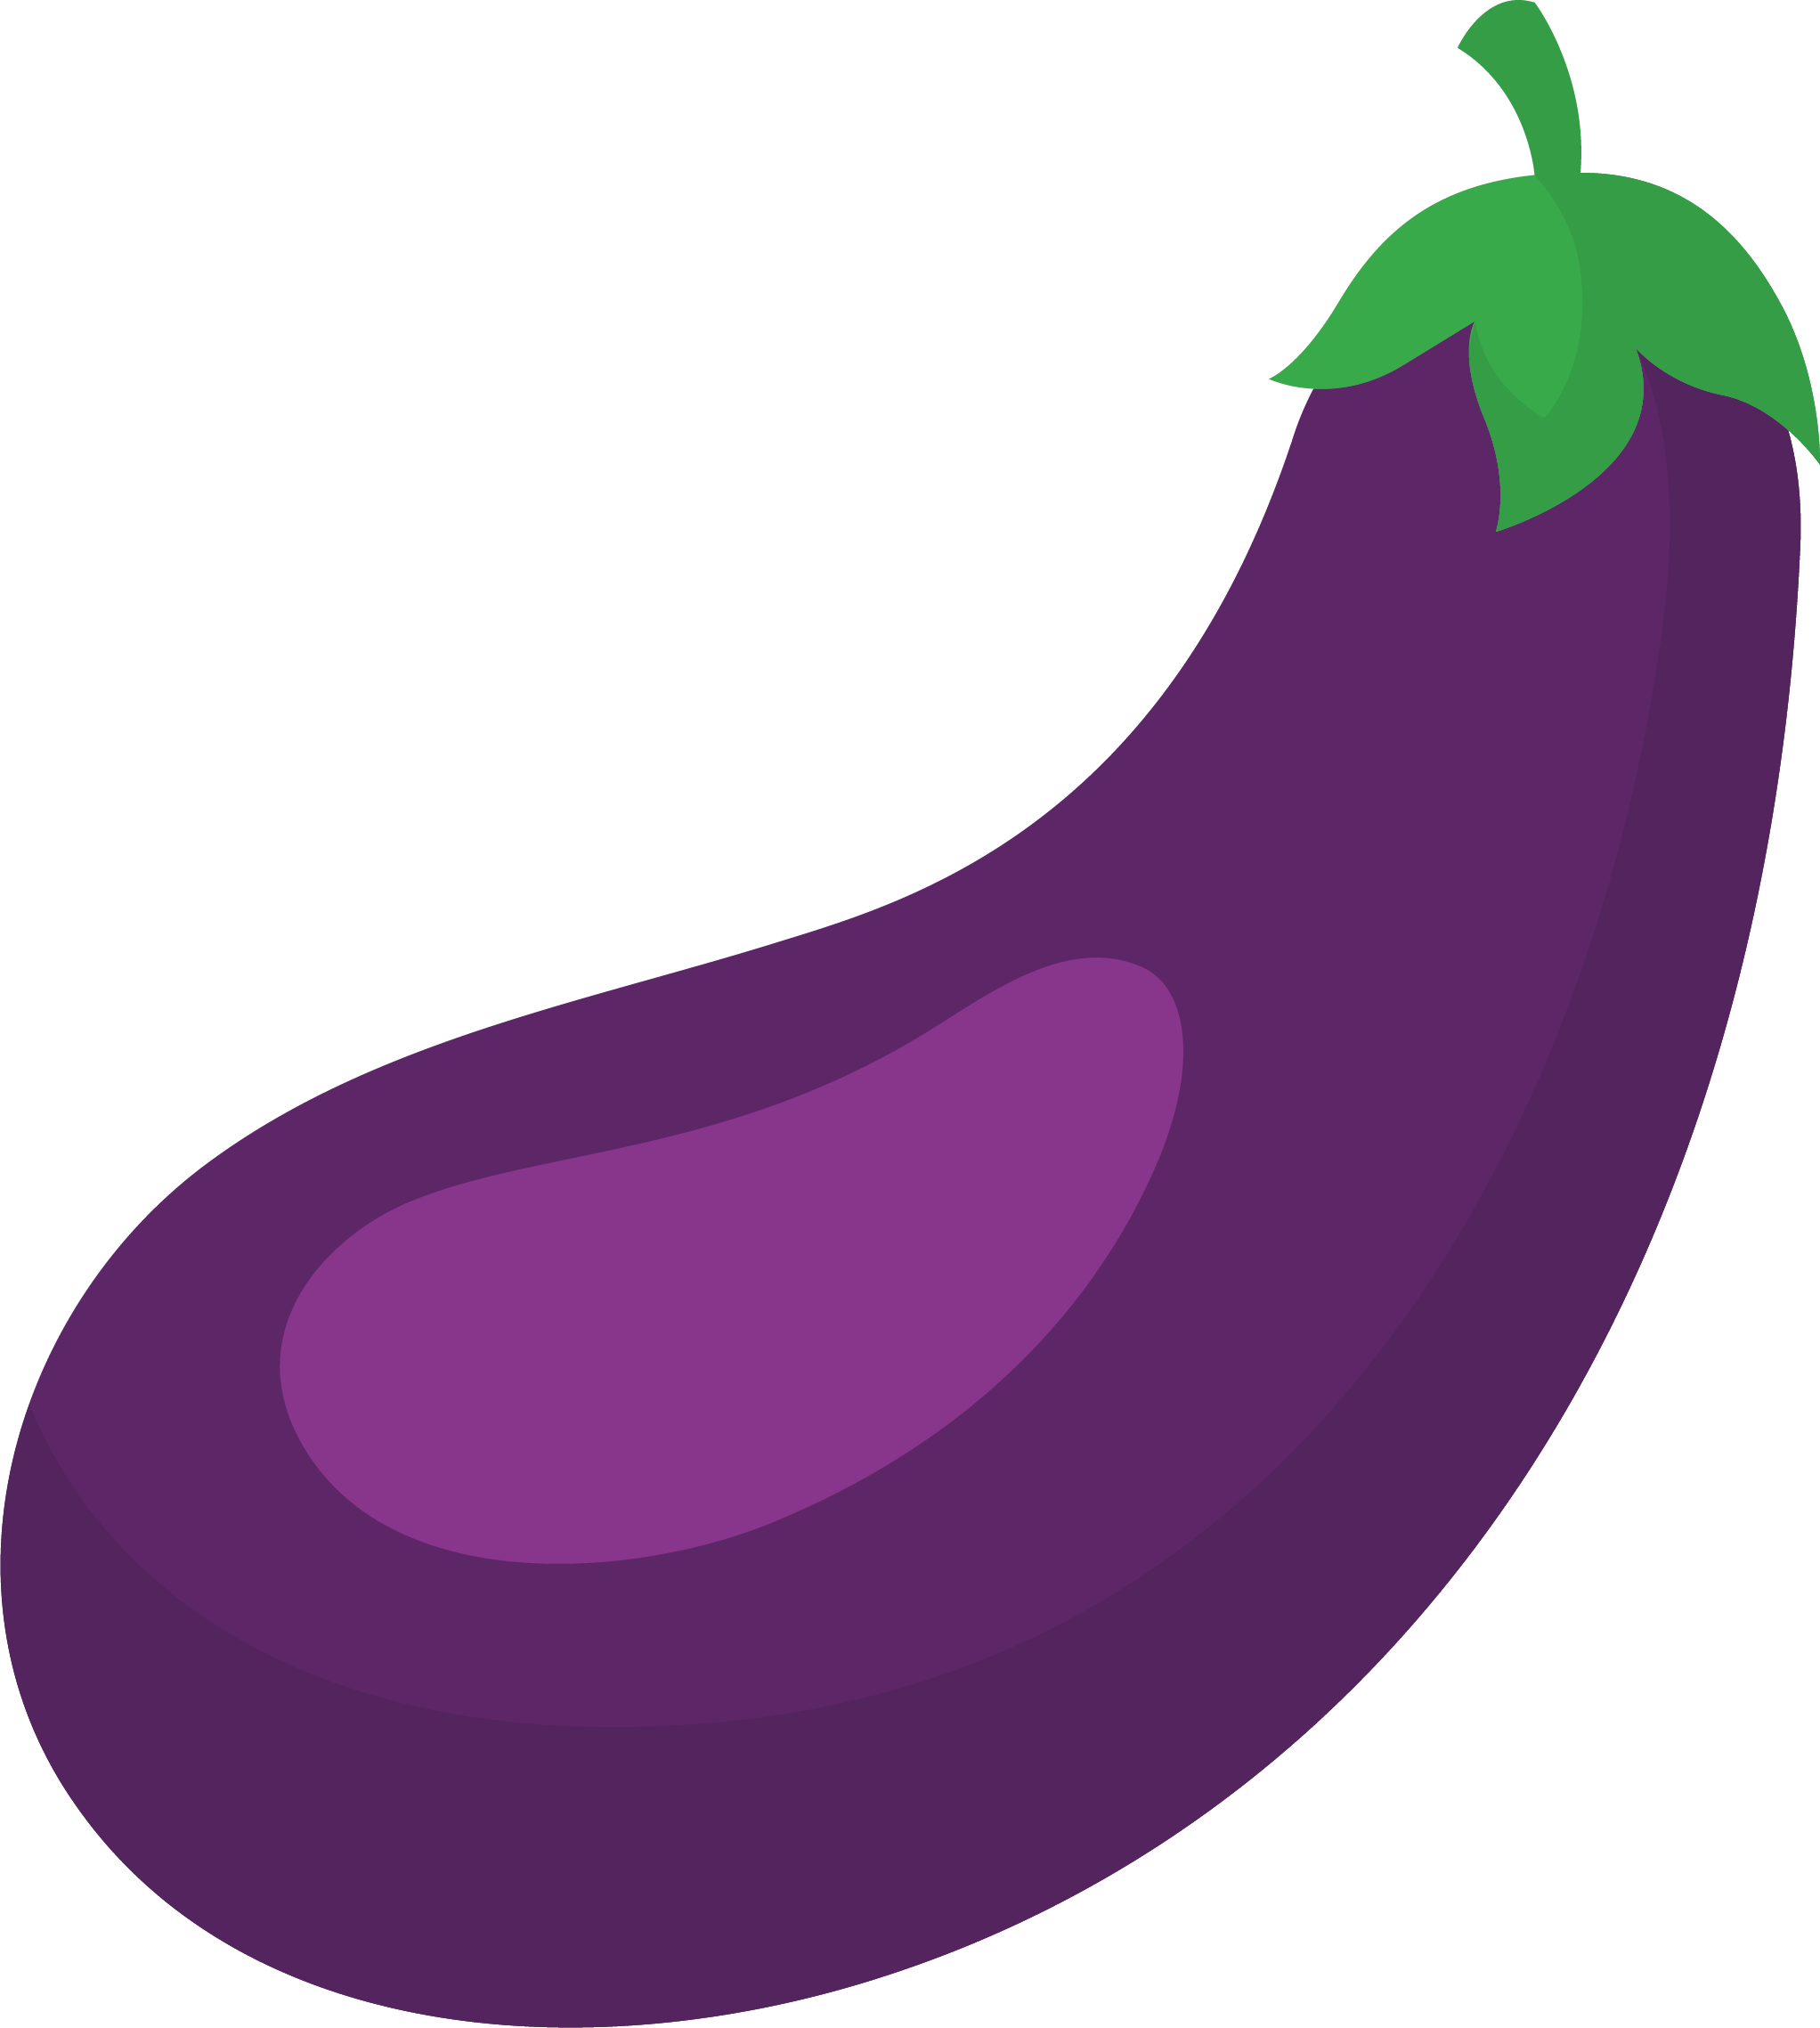 Eggplant clipart violet thing, Eggplant violet thing